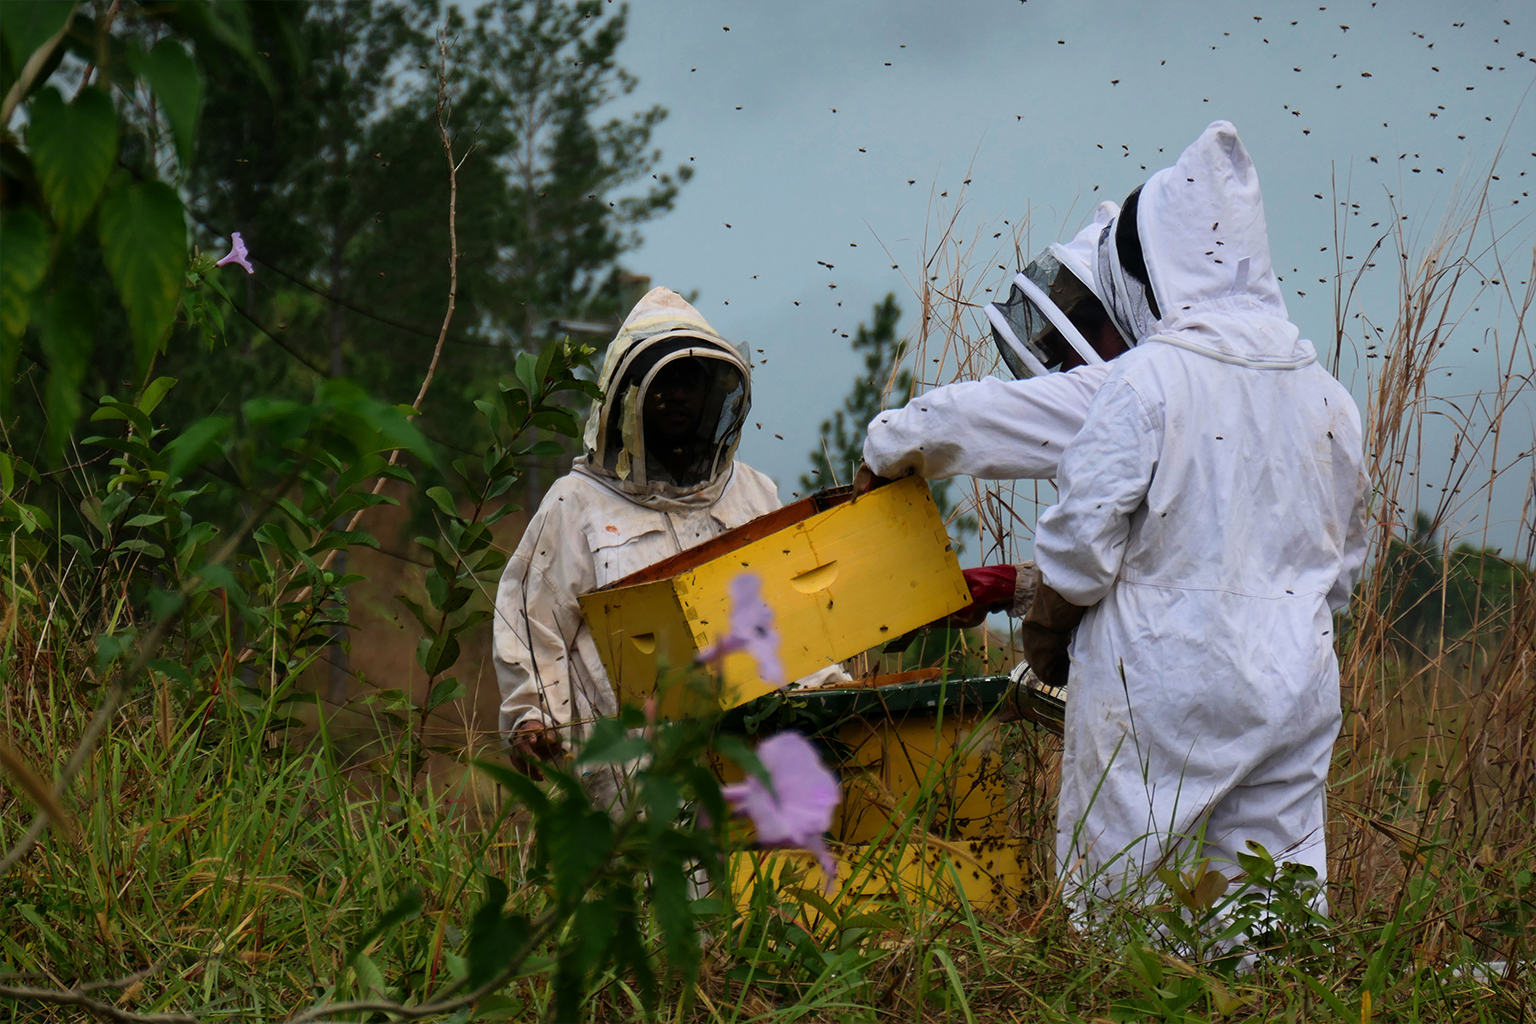 Batiri beekeepers extract frames full of honey from their community hives. Image by Monica Evans for Mongabay.